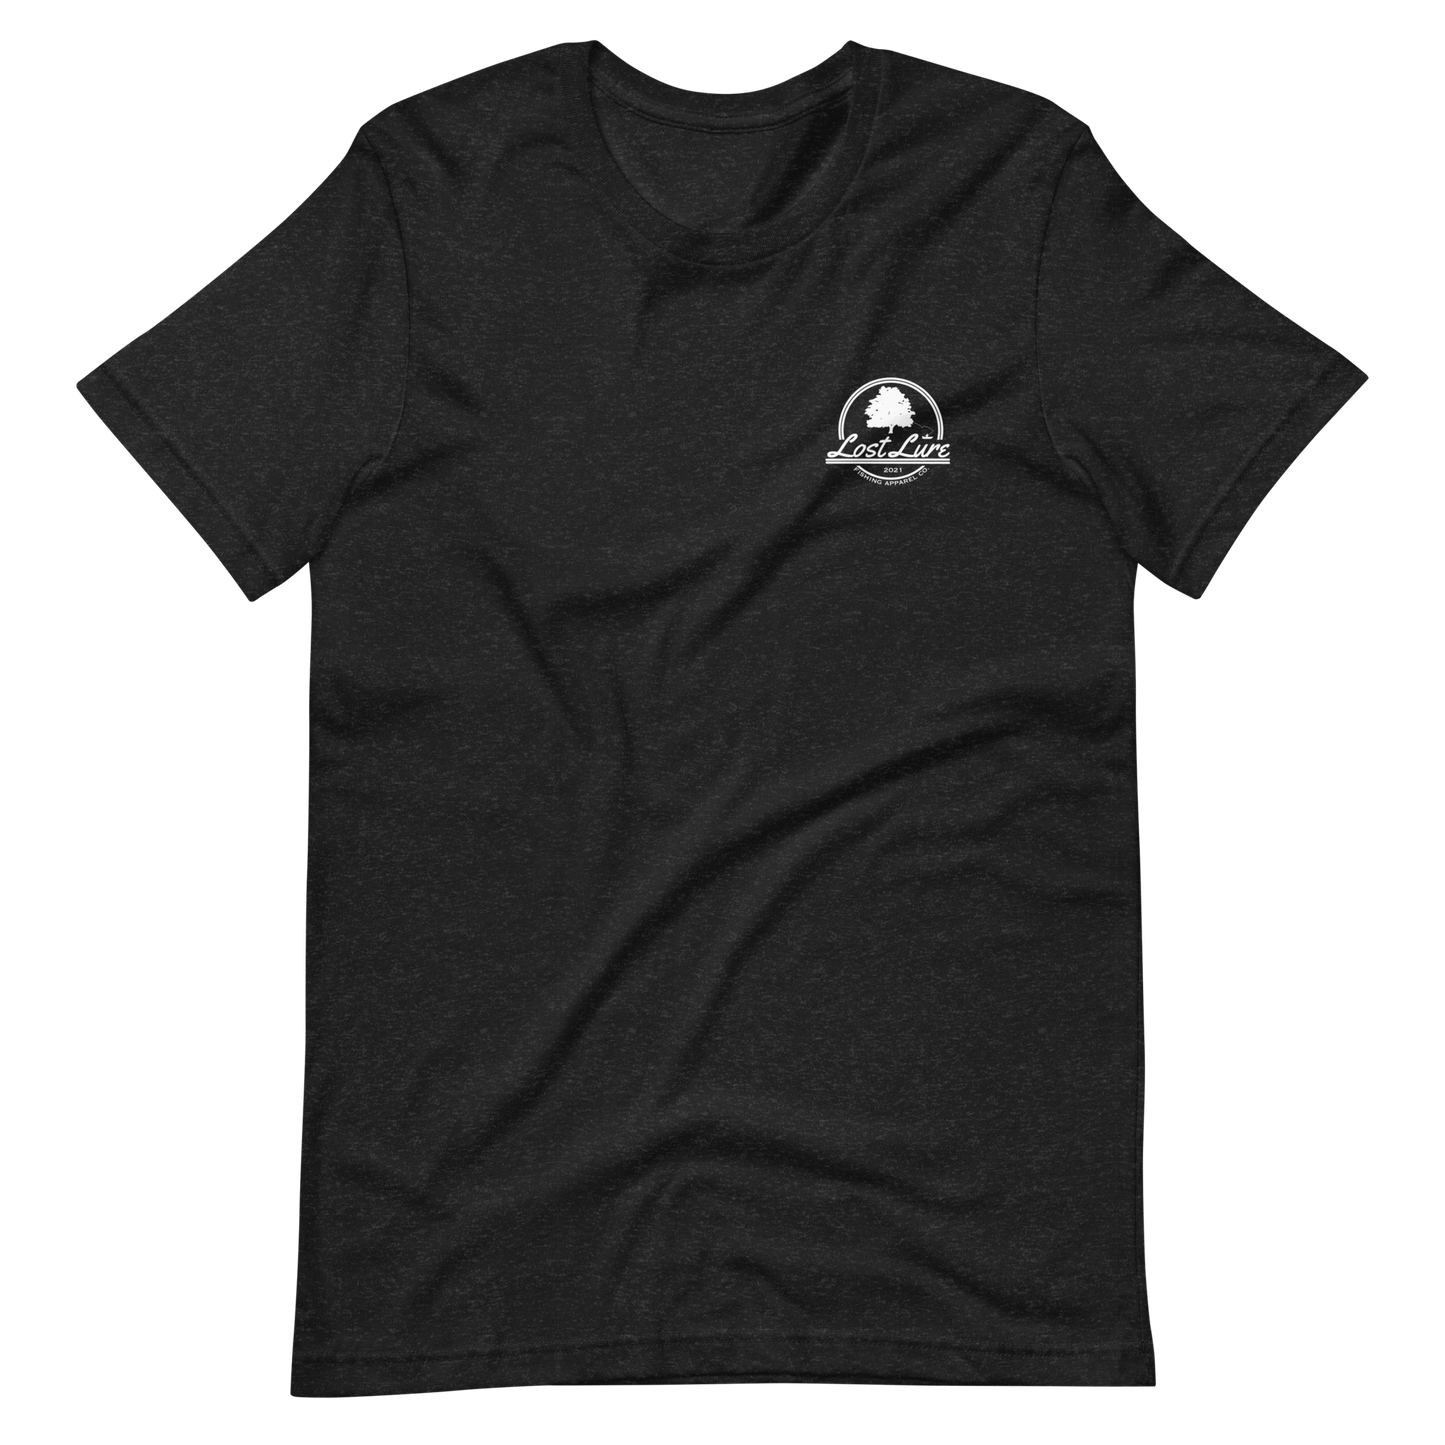 Fly fishing Lost lure shirt. It has a design on the back of the shirt black and white outline a fly fisherman and the Rocky Mountains.Dark grey fishing shirt, front side 